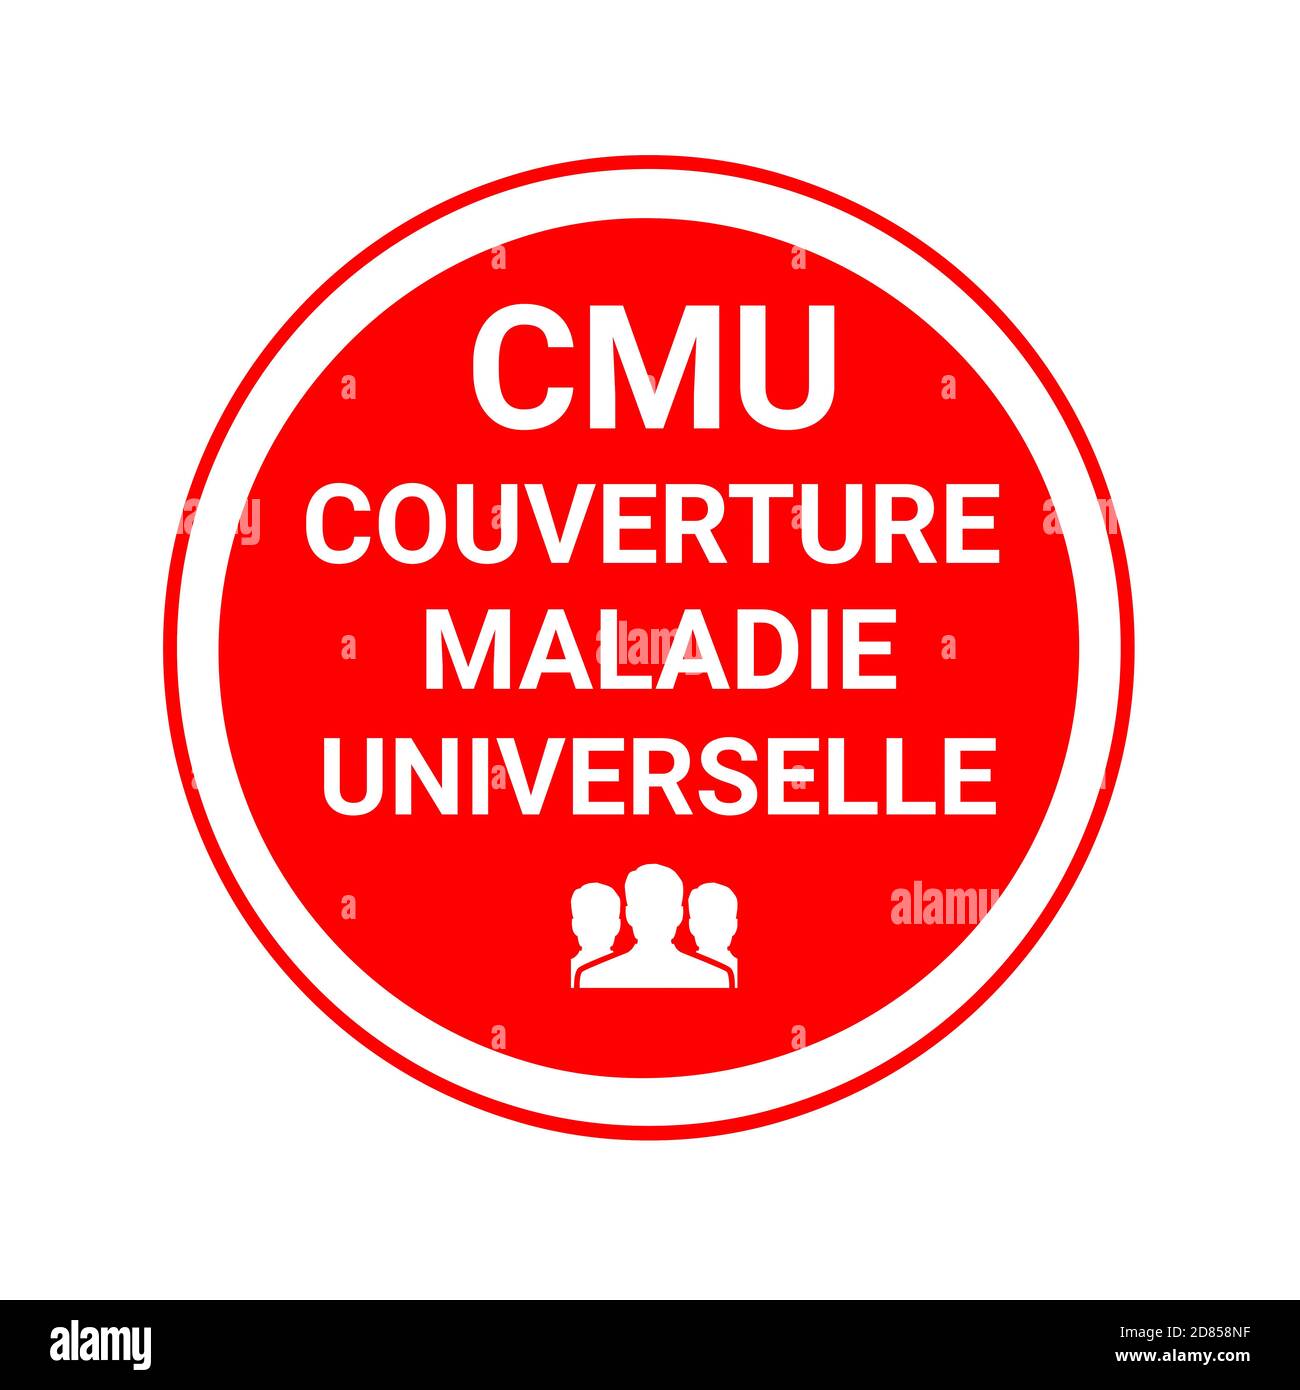 CMU symbol is the French universal health coverage called couverture maladie universelle in french language Stock Photo